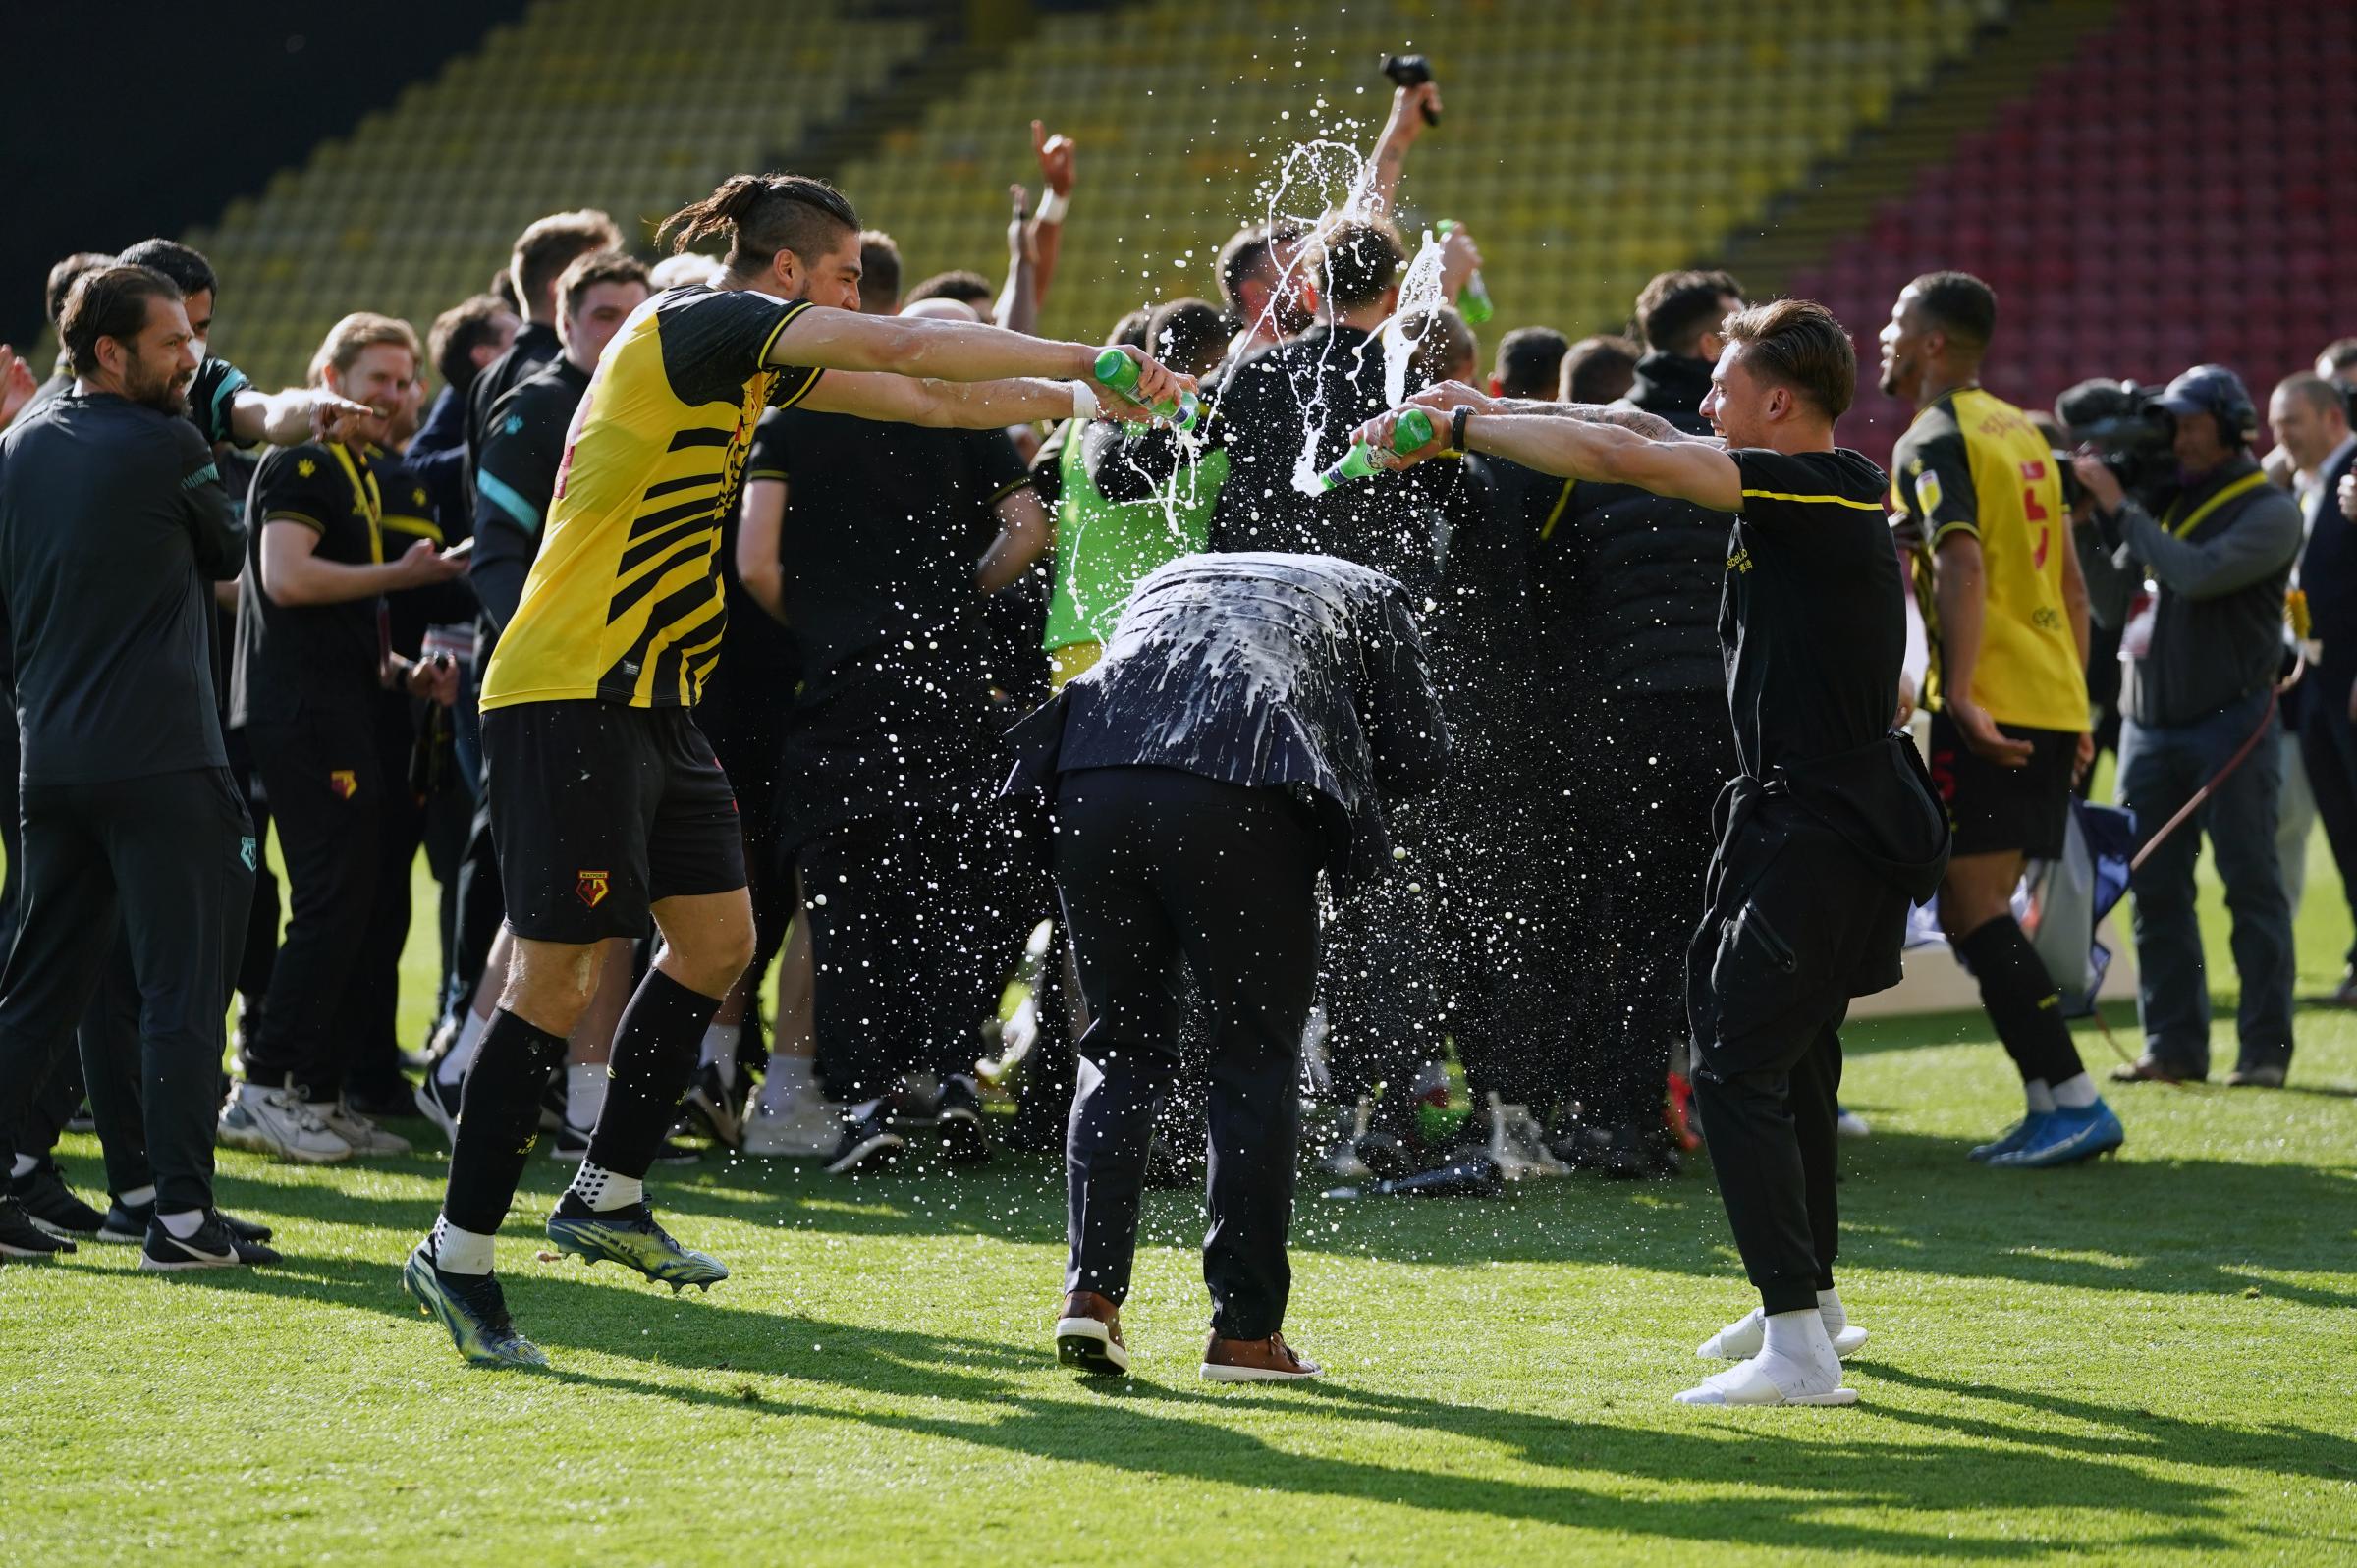 Watford manager Xisco has beer poured over him at the final whistle following their confirmed promotion to the Premier League following their 1-0 win over Millwall at Vicarage Road, Watford. Picture date: Saturday April 24, 2021..